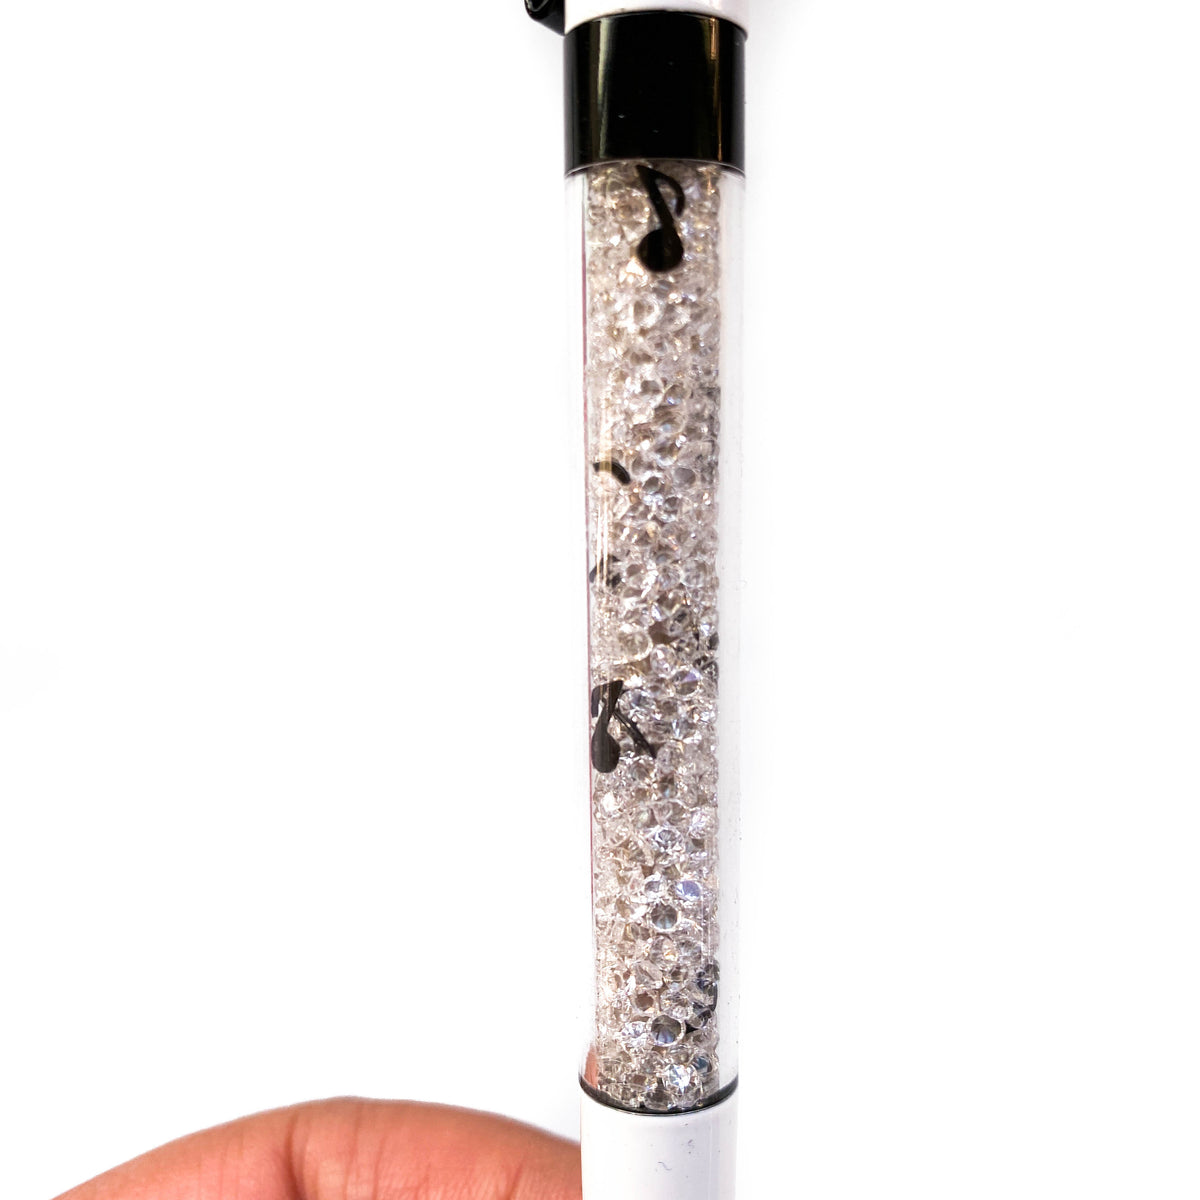 Music Man Imperfect Crystal VBPen | limited pen